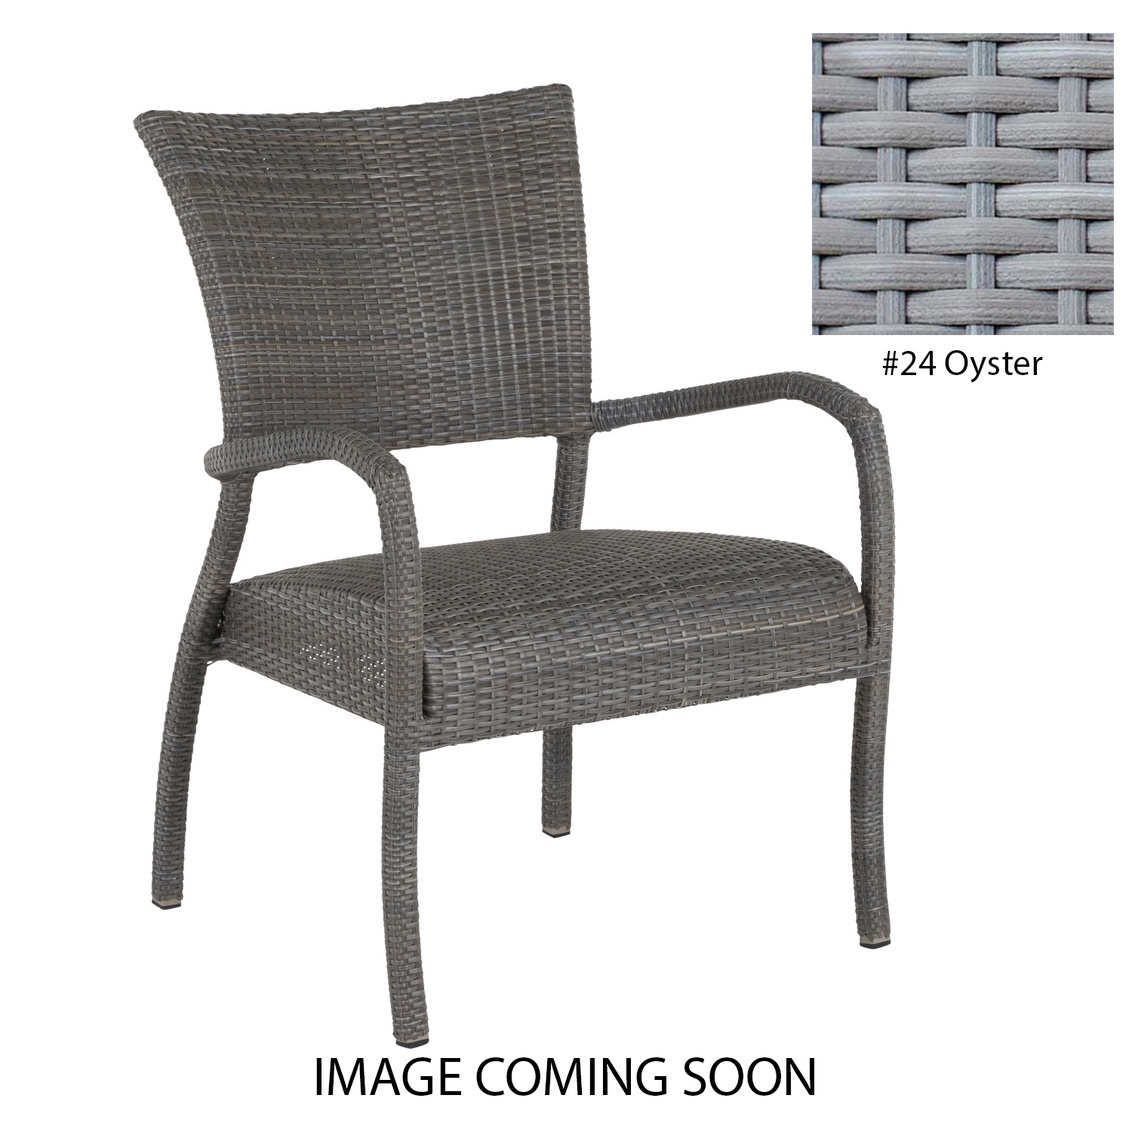 skye plus woven euro lounge in oyster product image